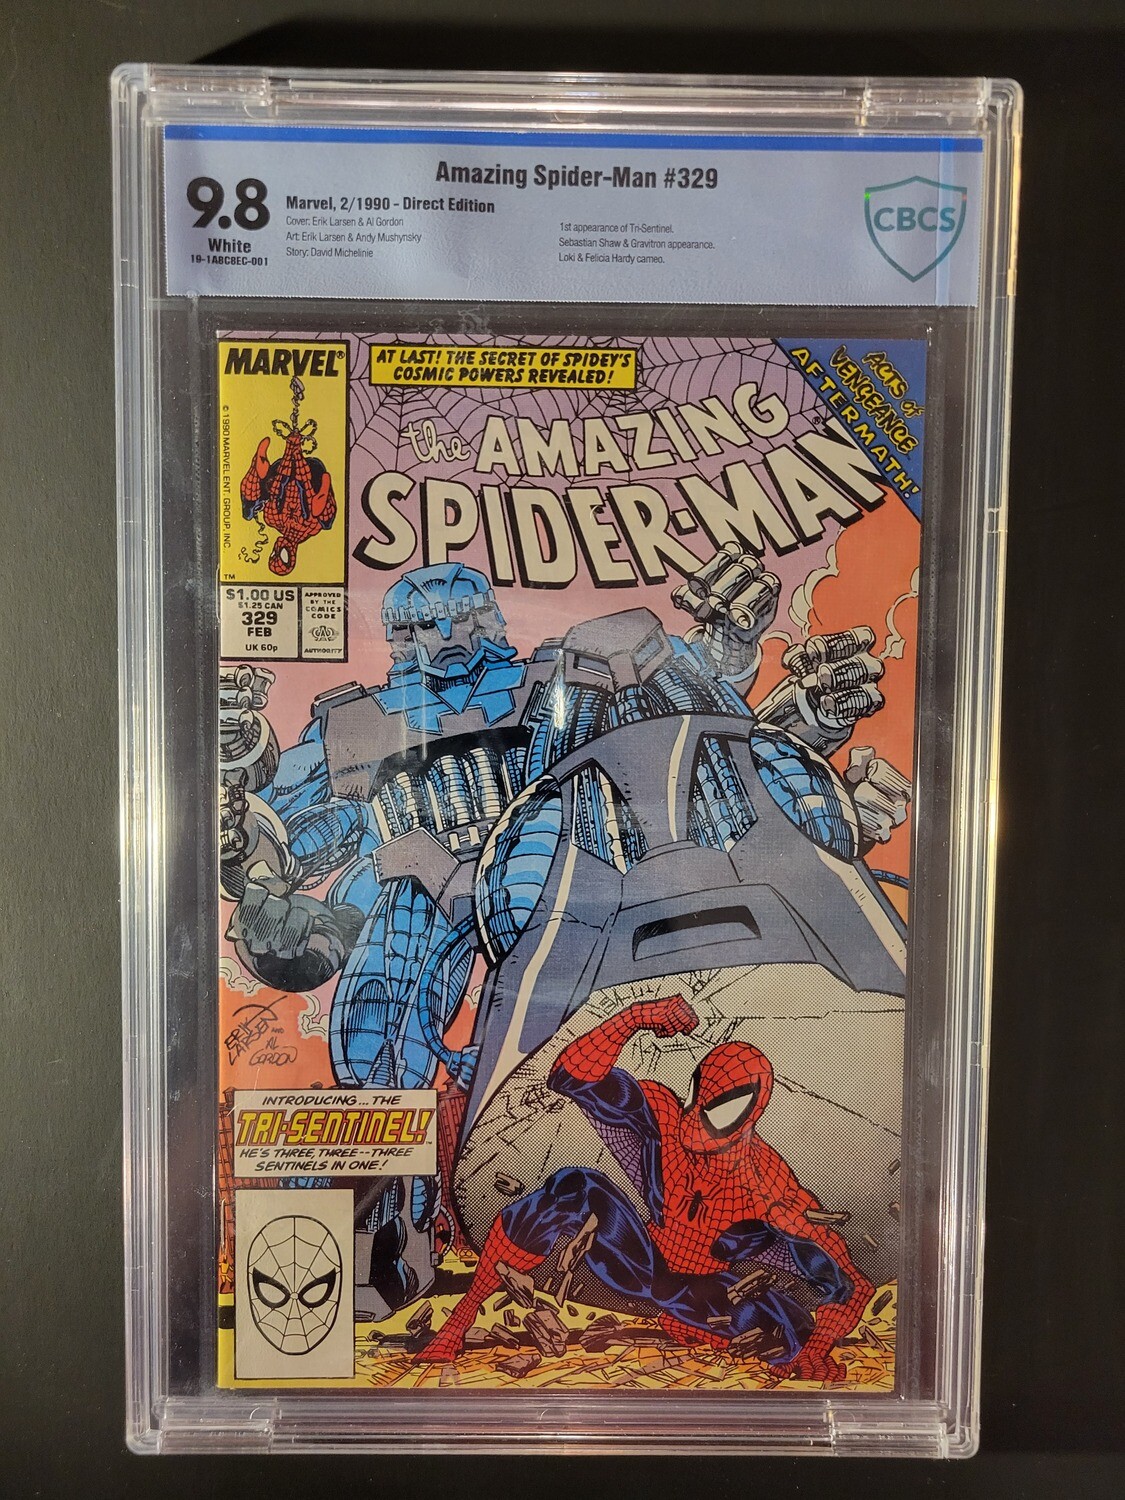 Amazing Spider-Man #329 CBCS 9.8 1st appearance of Tri-Sentinel